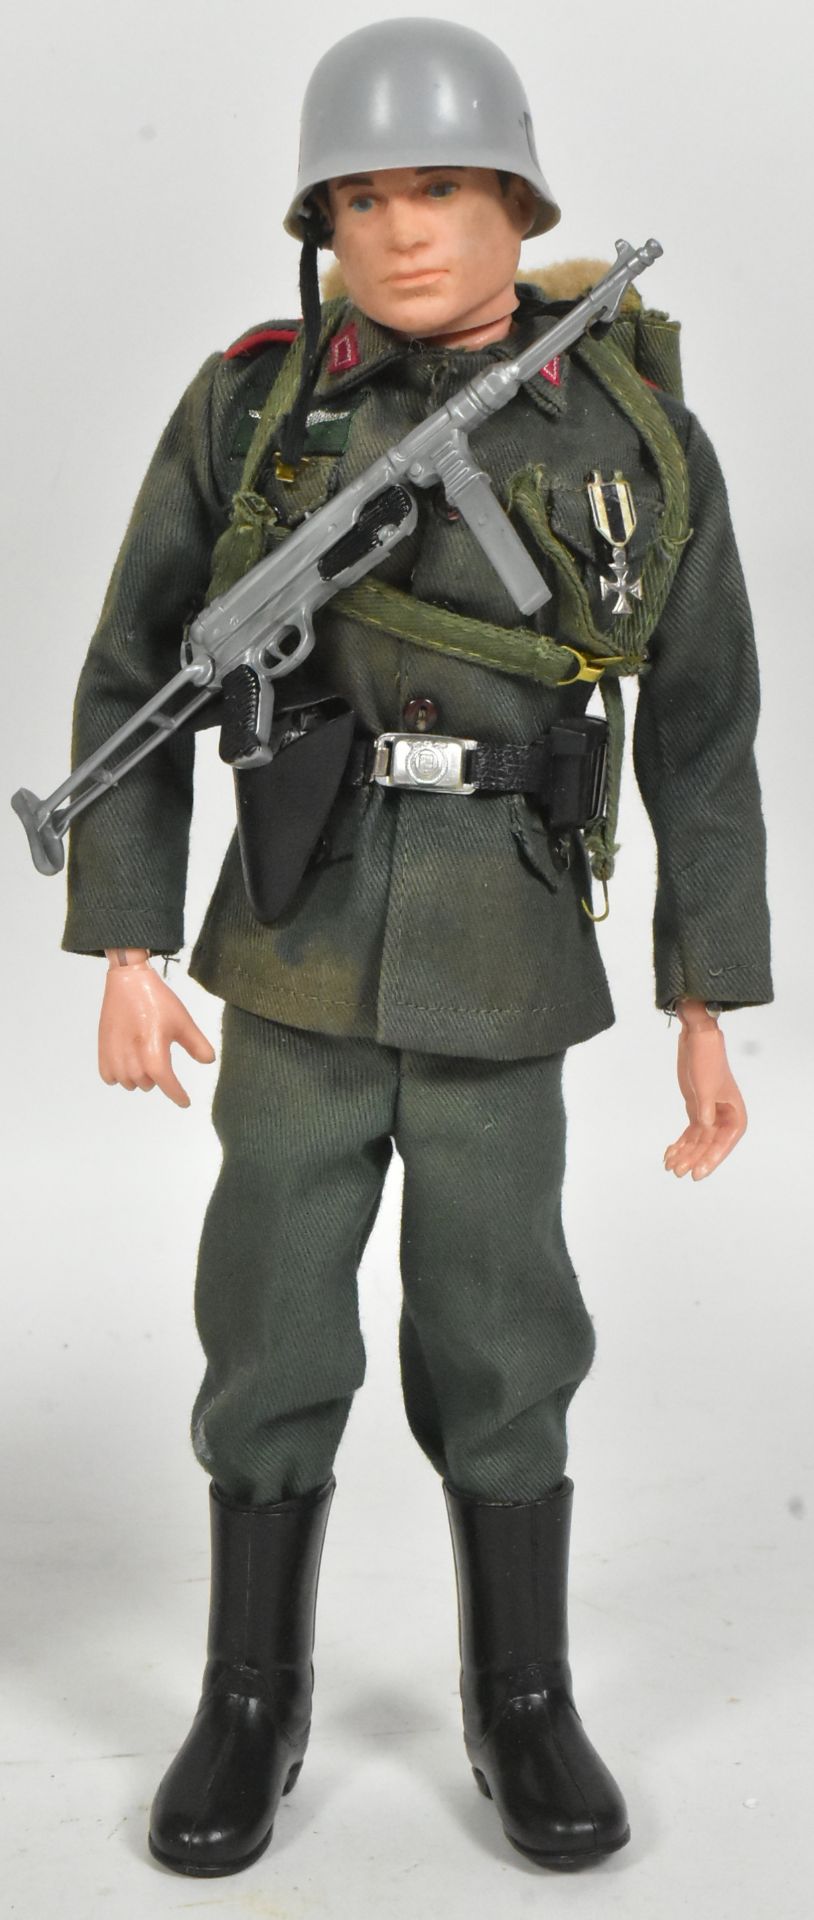 ACTION MAN - X2 VINTAGE PALITOY ACTION MAN FIGURES - Image 3 of 5